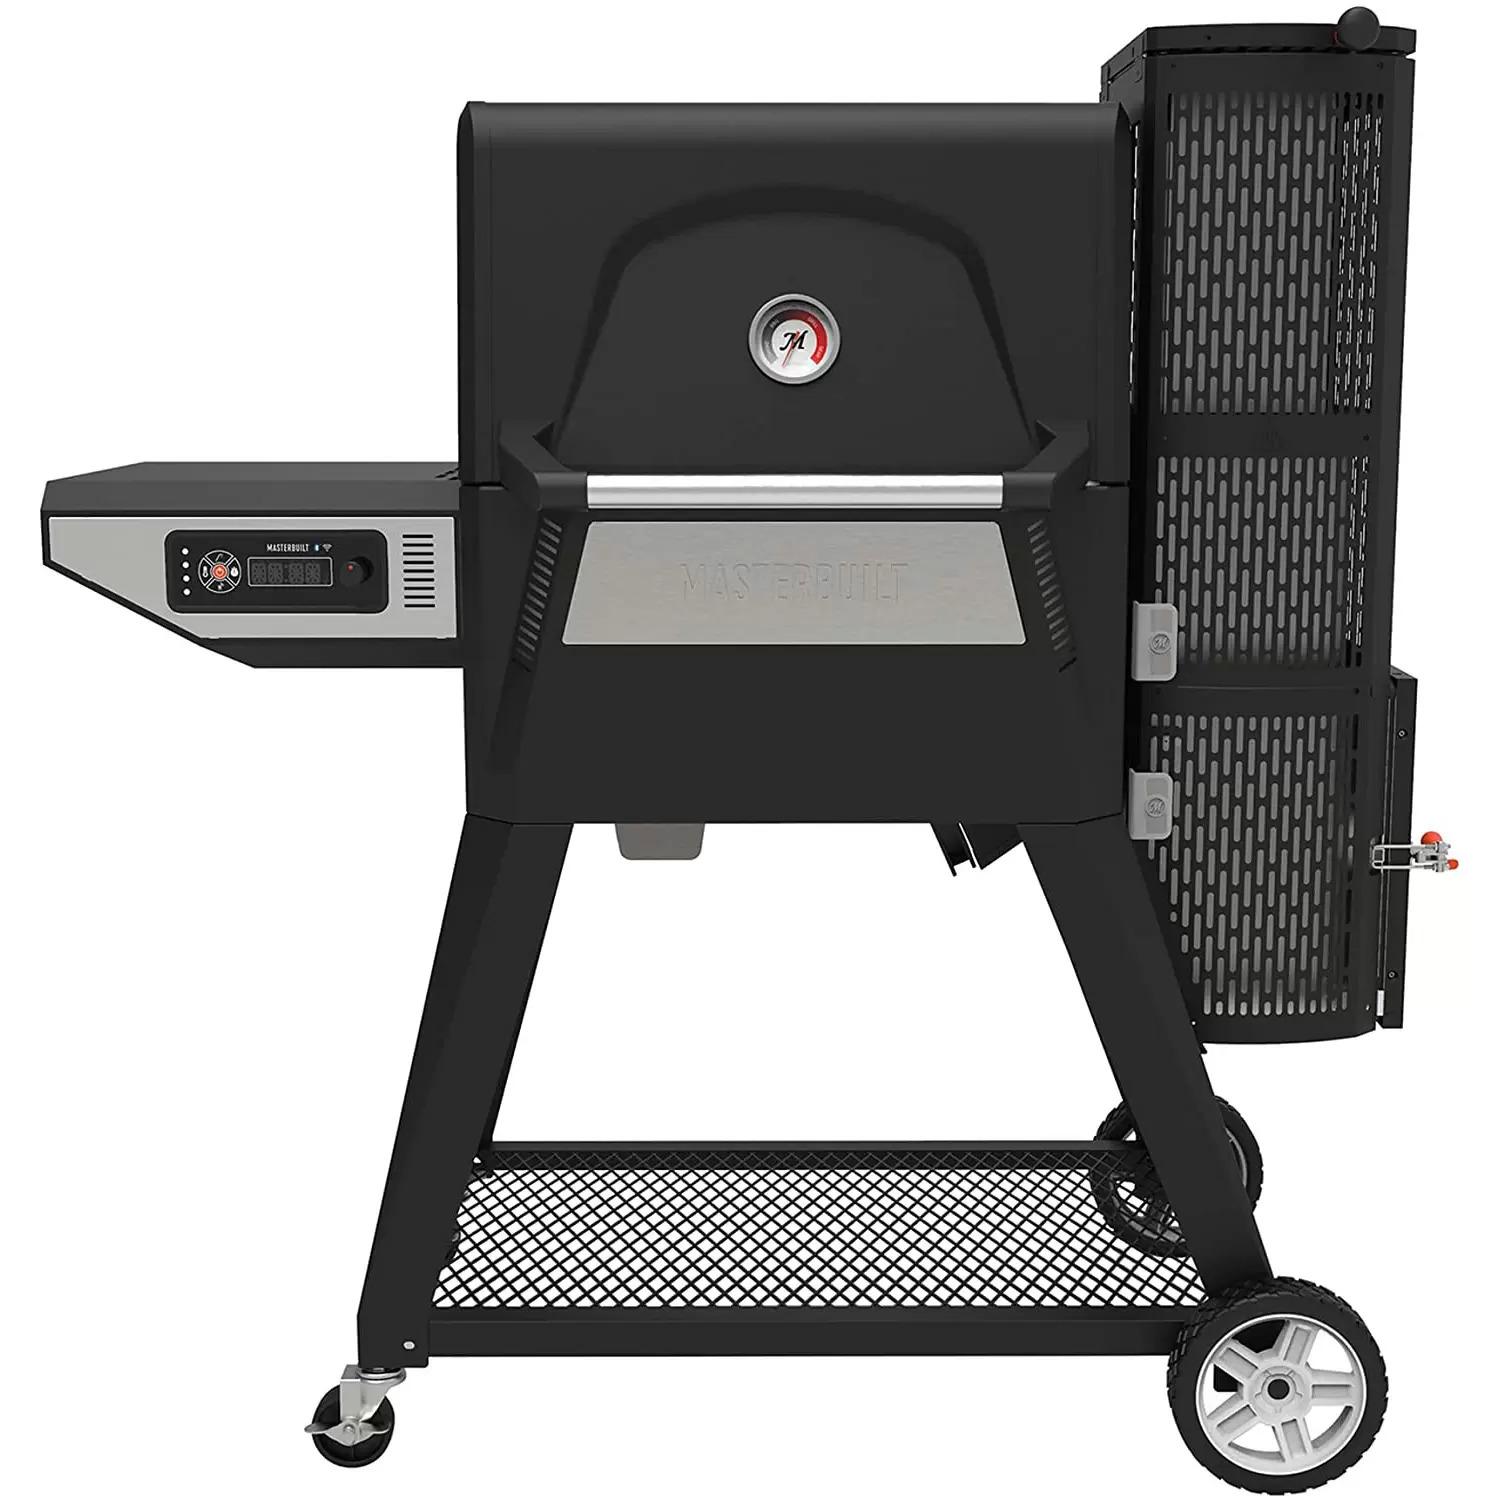 Masterbuilt Gravity Series 560 Digital Charcoal Grill and Smoker for $397 Shipped